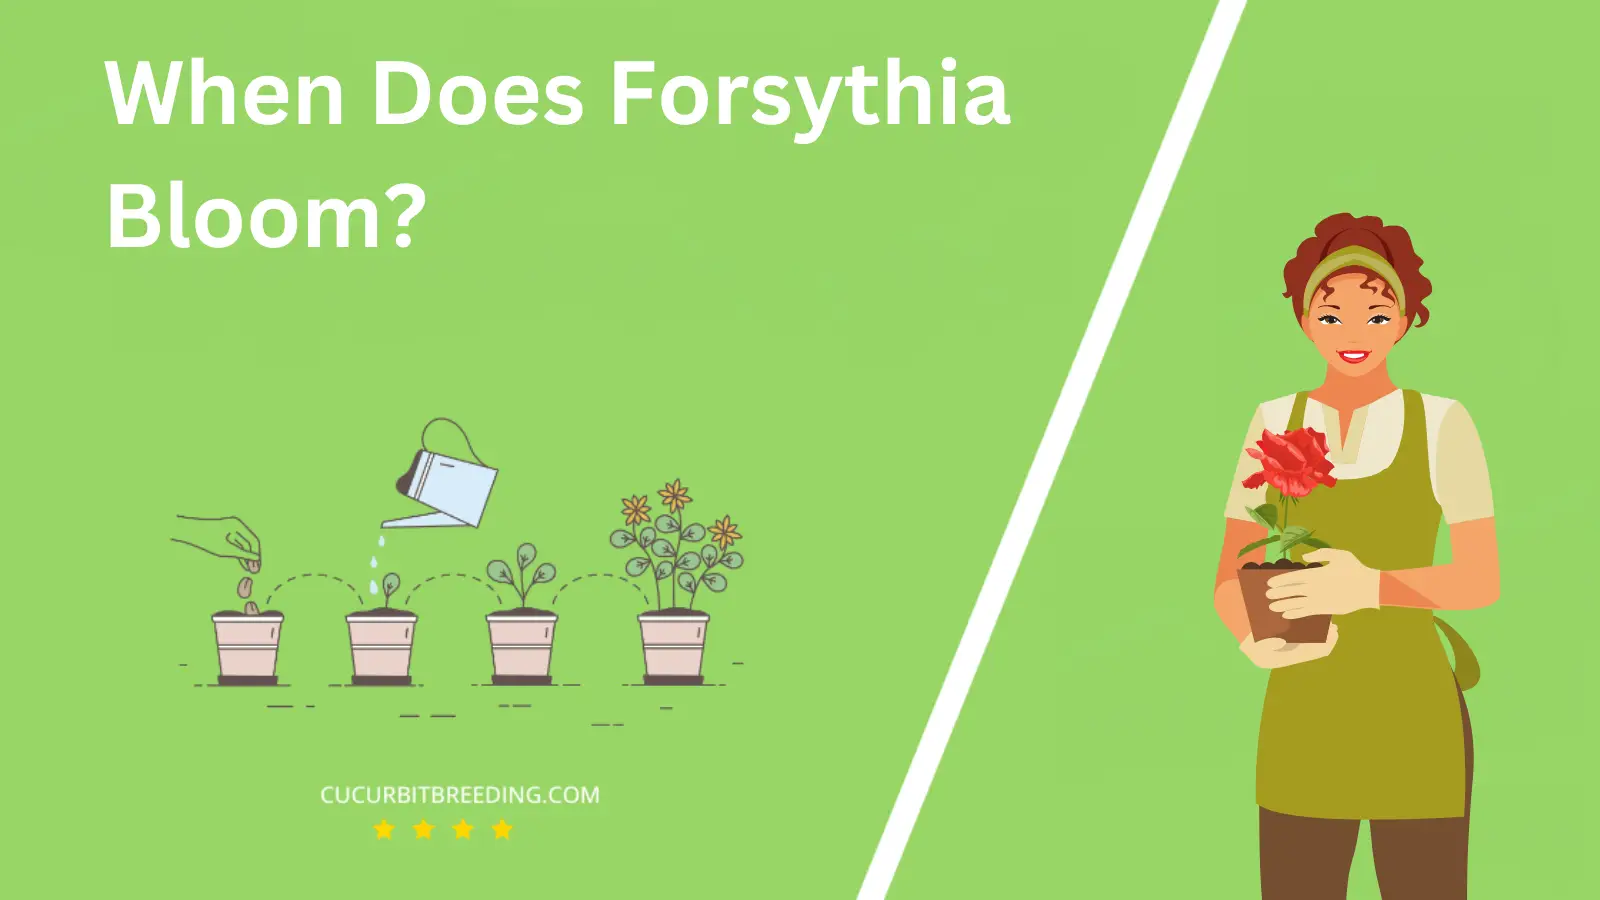 When Does Forsythia Bloom?